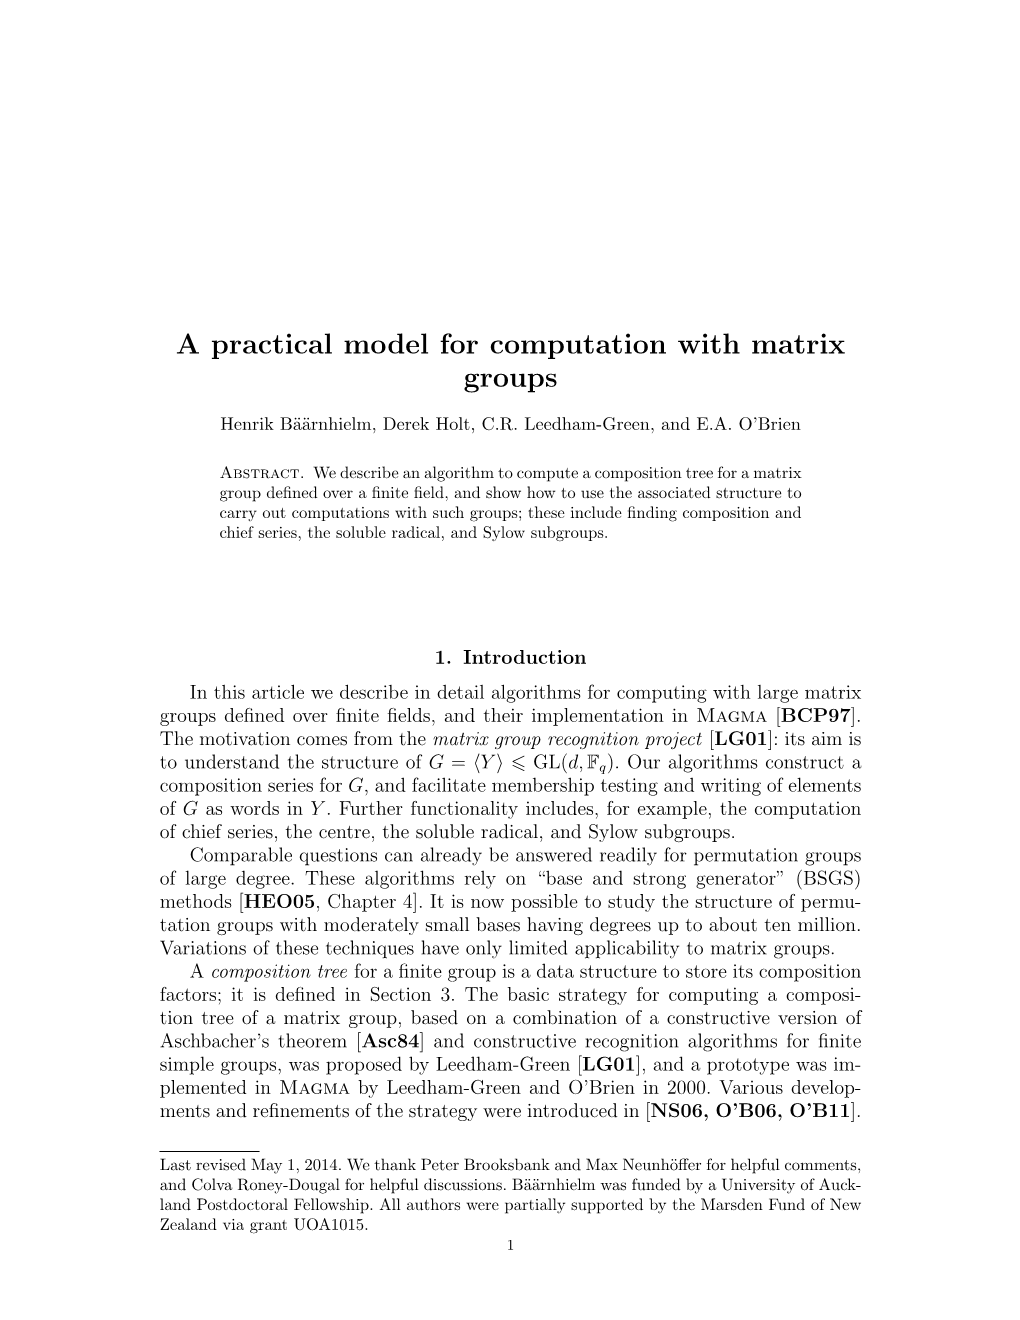 A Practical Model for Computation with Matrix Groups